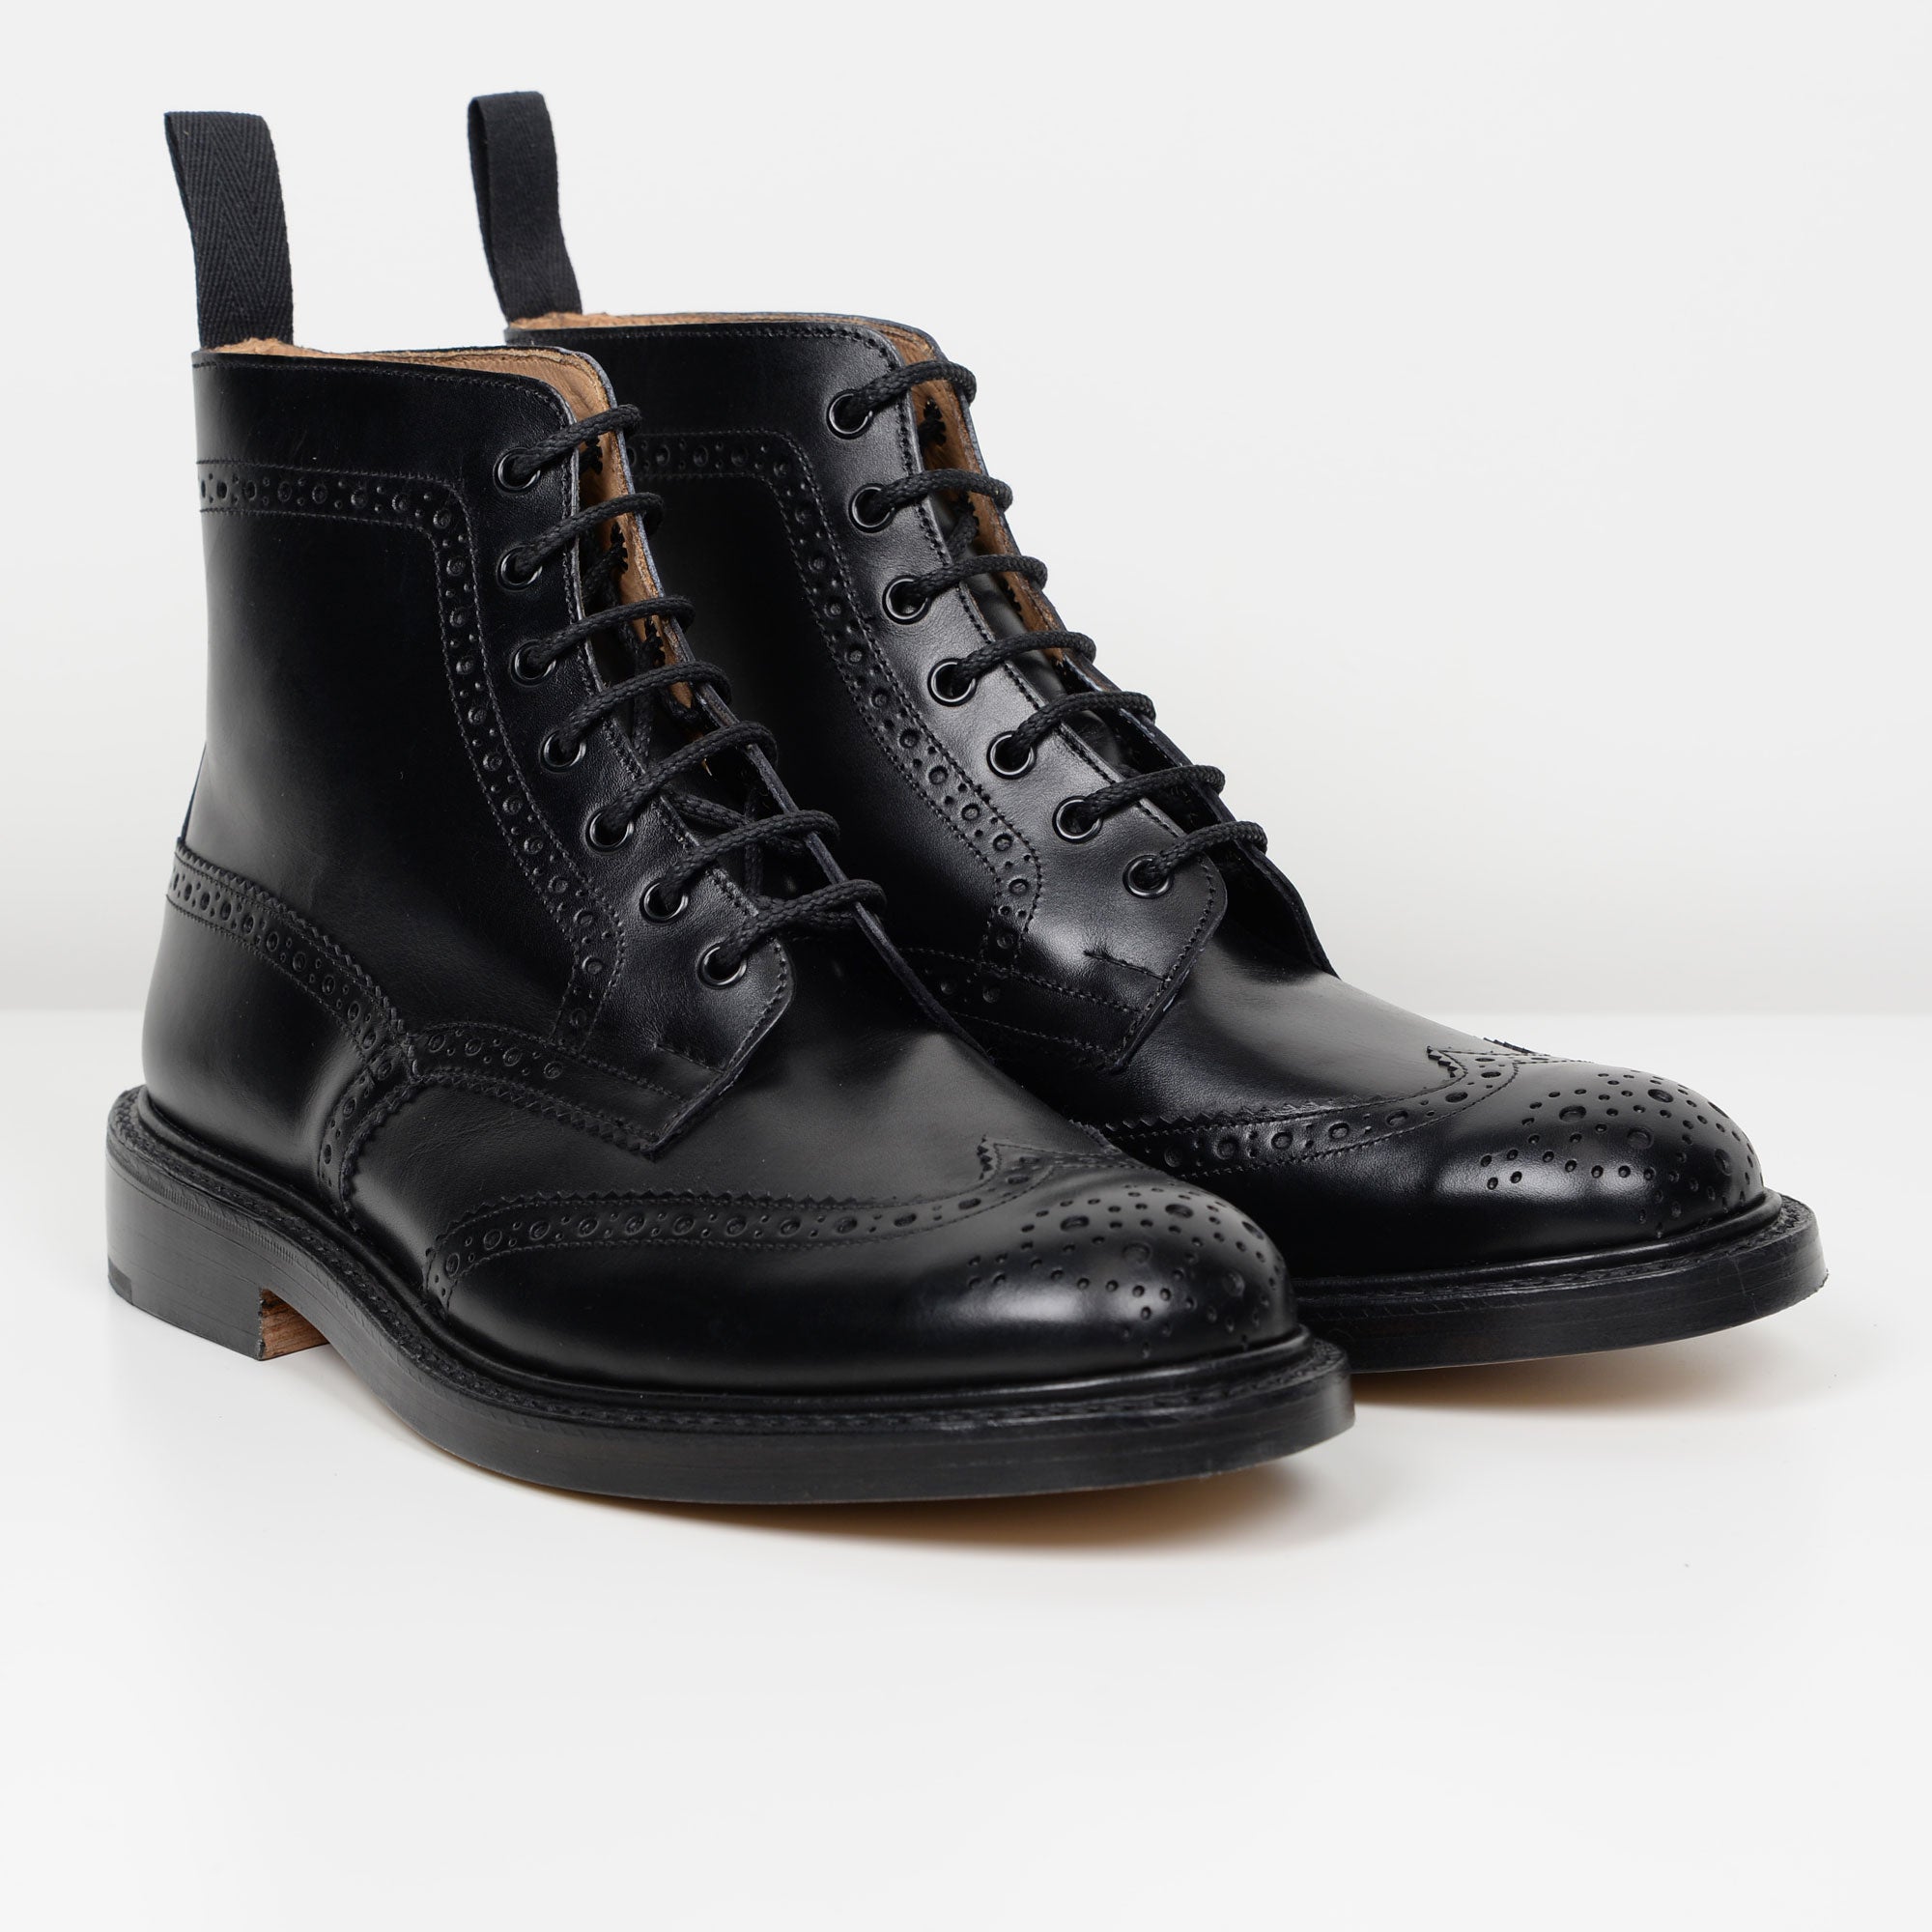 Black Stow 5634 Tricker's Derby Brogue Boots from Quarter & Last